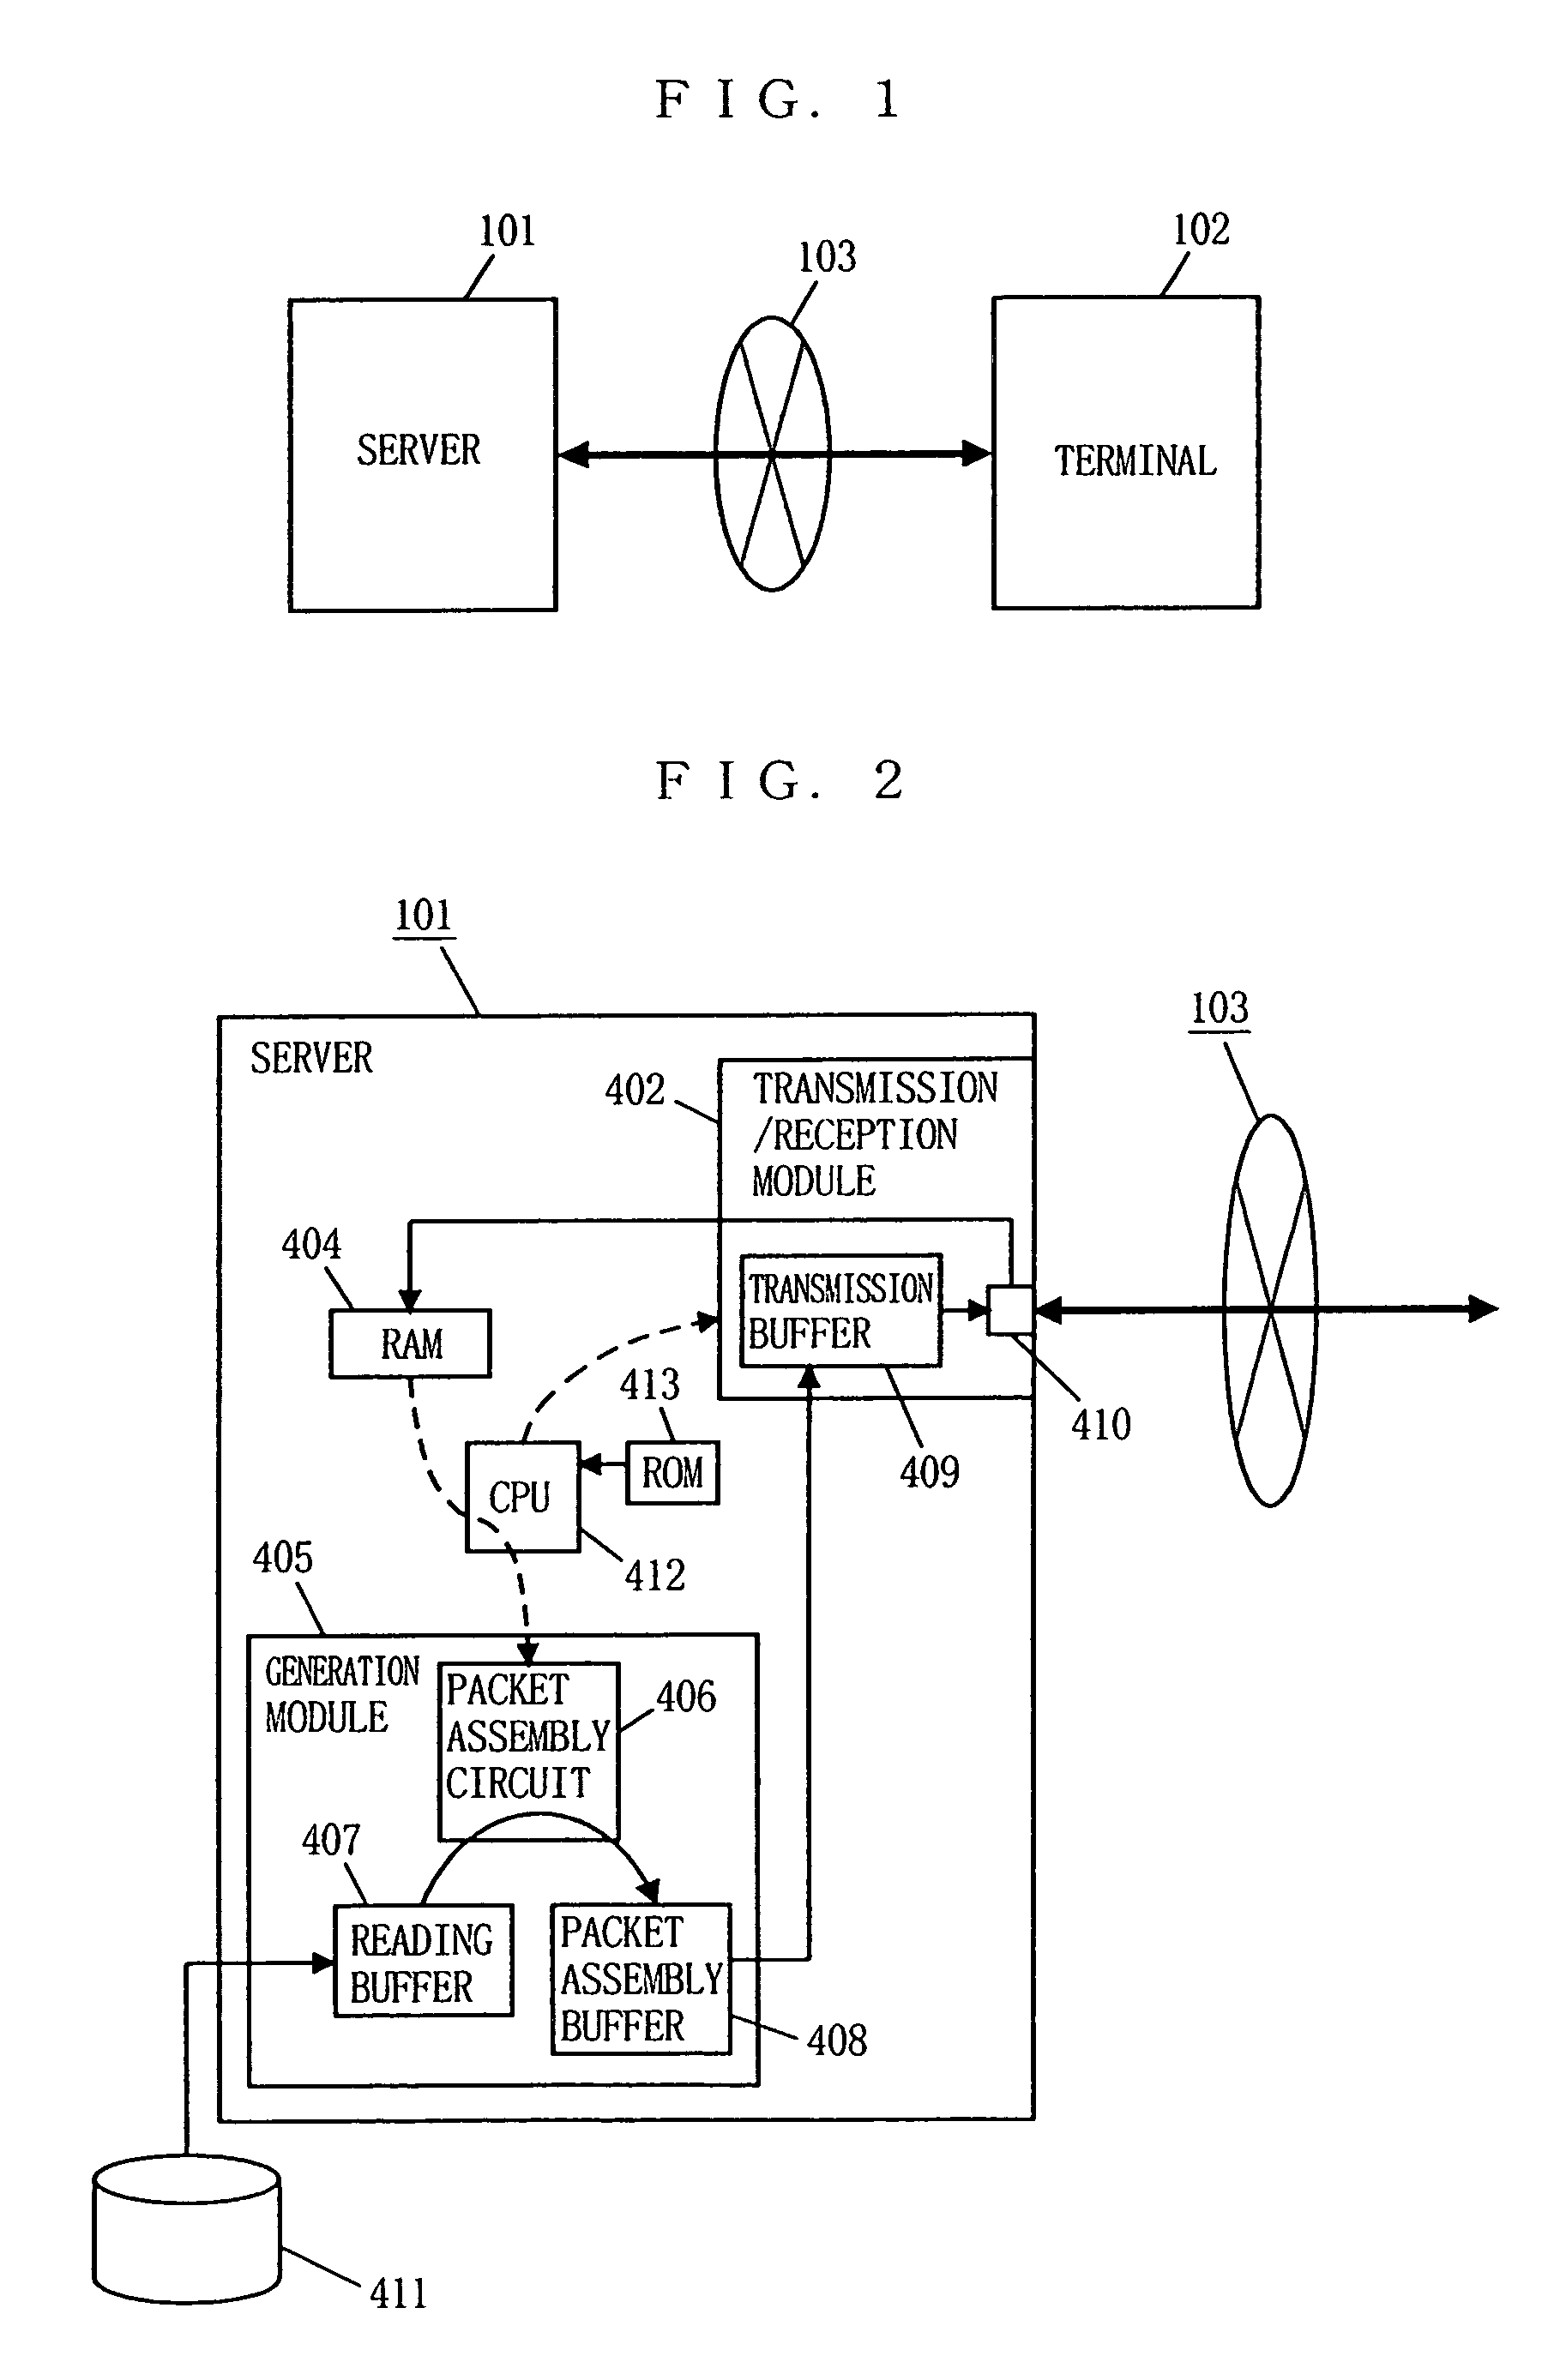 System for transmitting stream data from server to client based on buffer and transmission capacities and delay time of the client